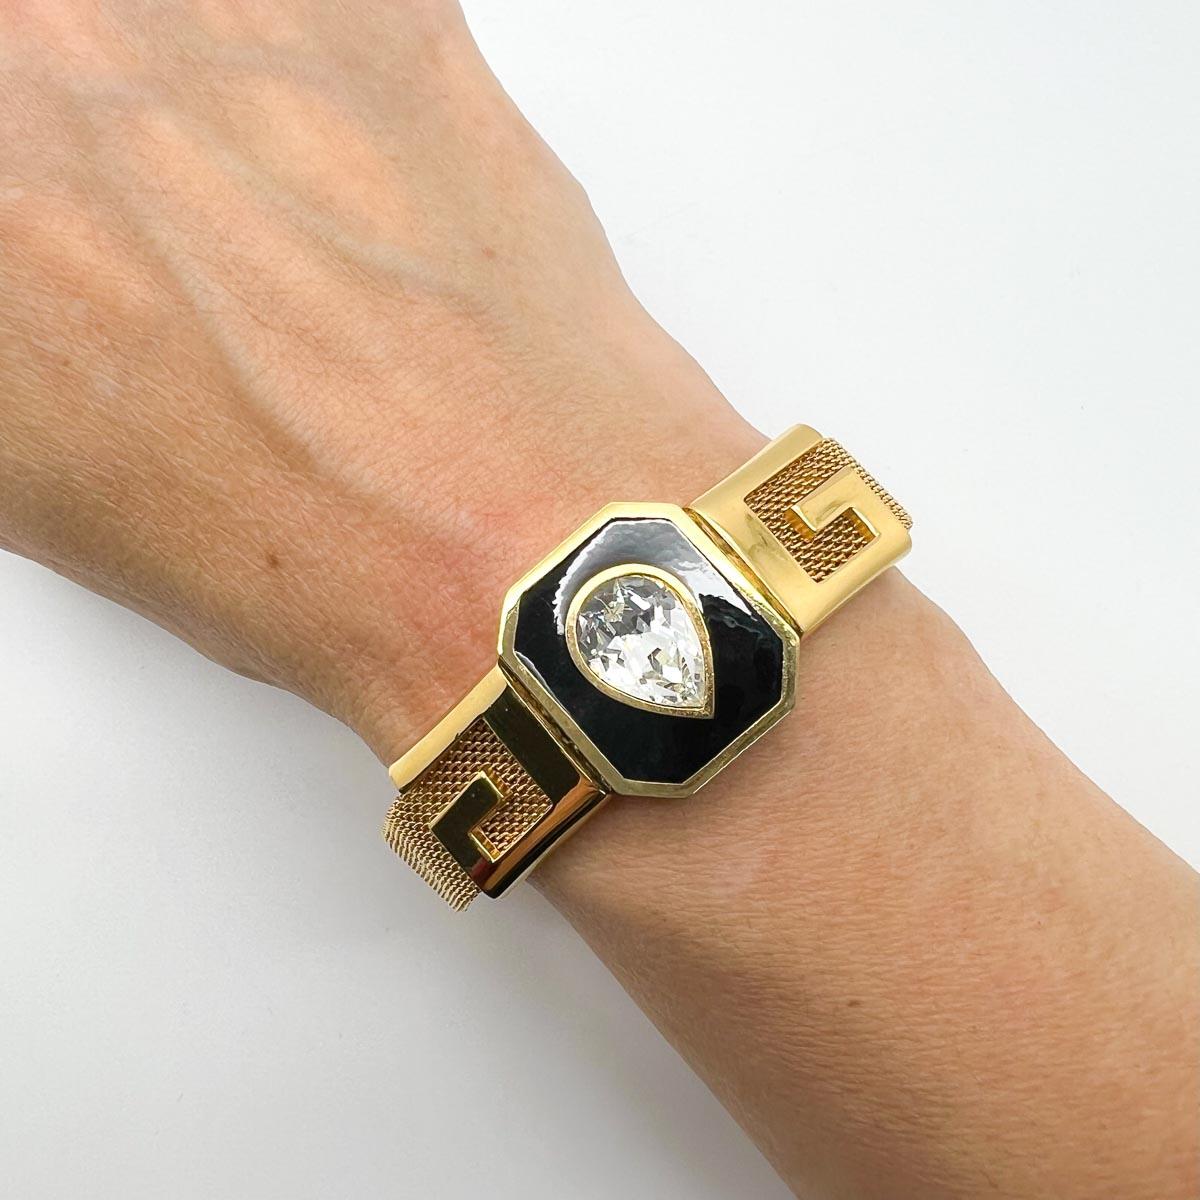 From the House of Givenchy in 1978 comes our dated Vintage Givenchy Logo Bracelet. Featuring fine mesh detailing, a sparkling teardrop crystal and central logo G motifs, this find will adorn your wrist to perfection.

Vintage Condition: Very good